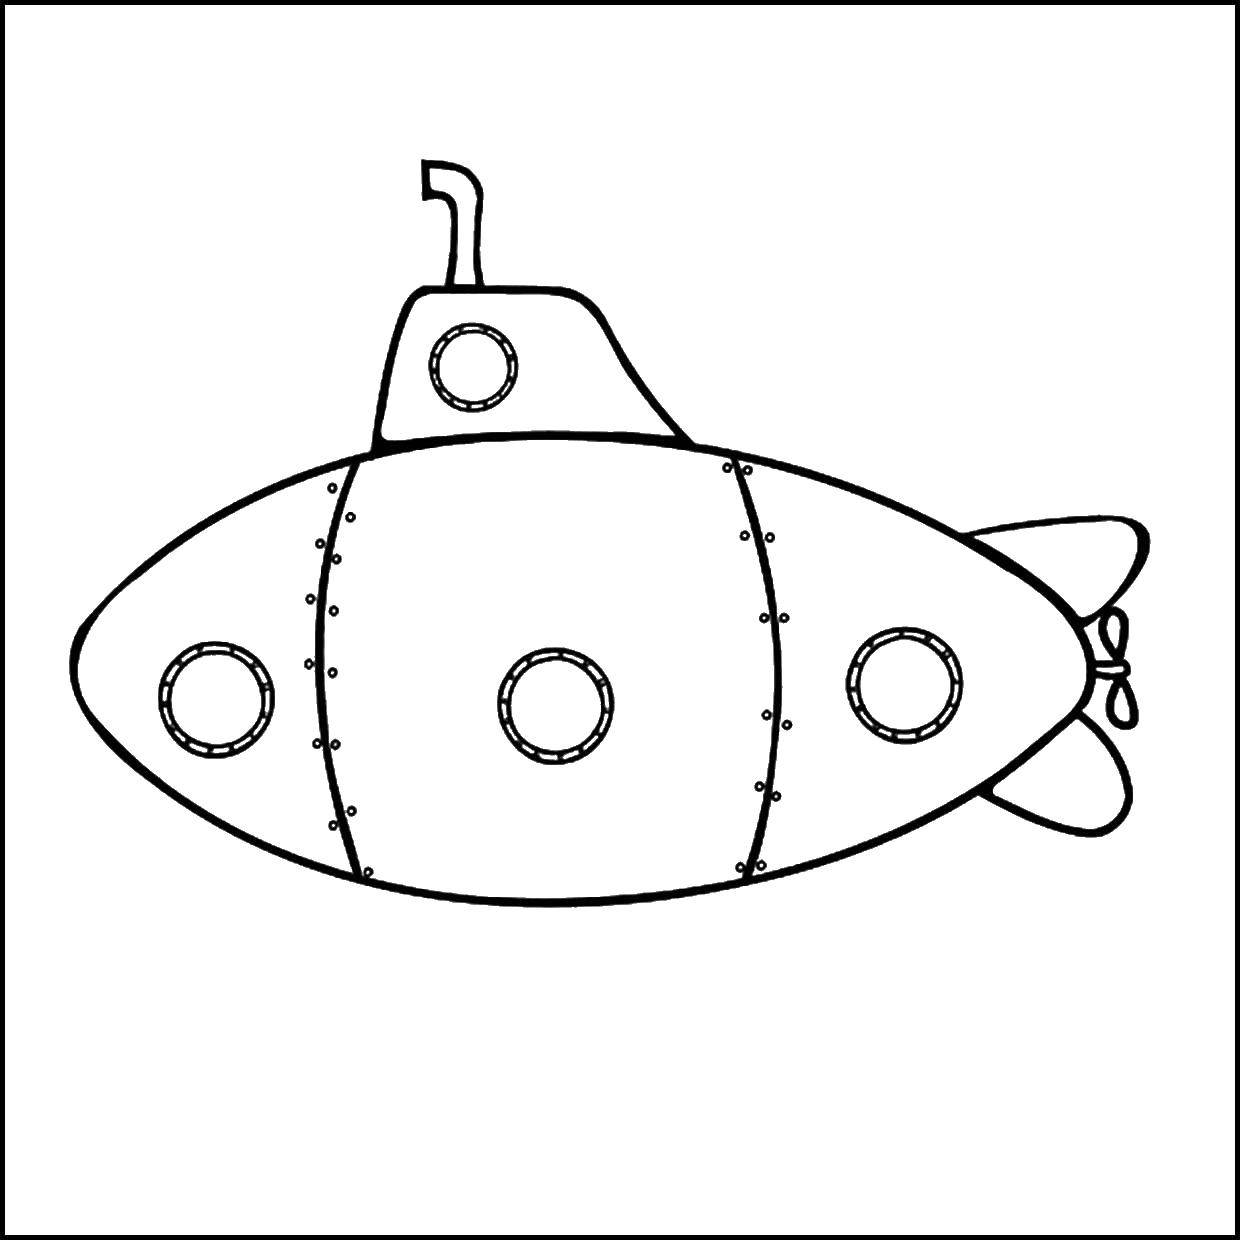 Coloring Submarine. Category transportation. Tags:  underwater transport, boat.